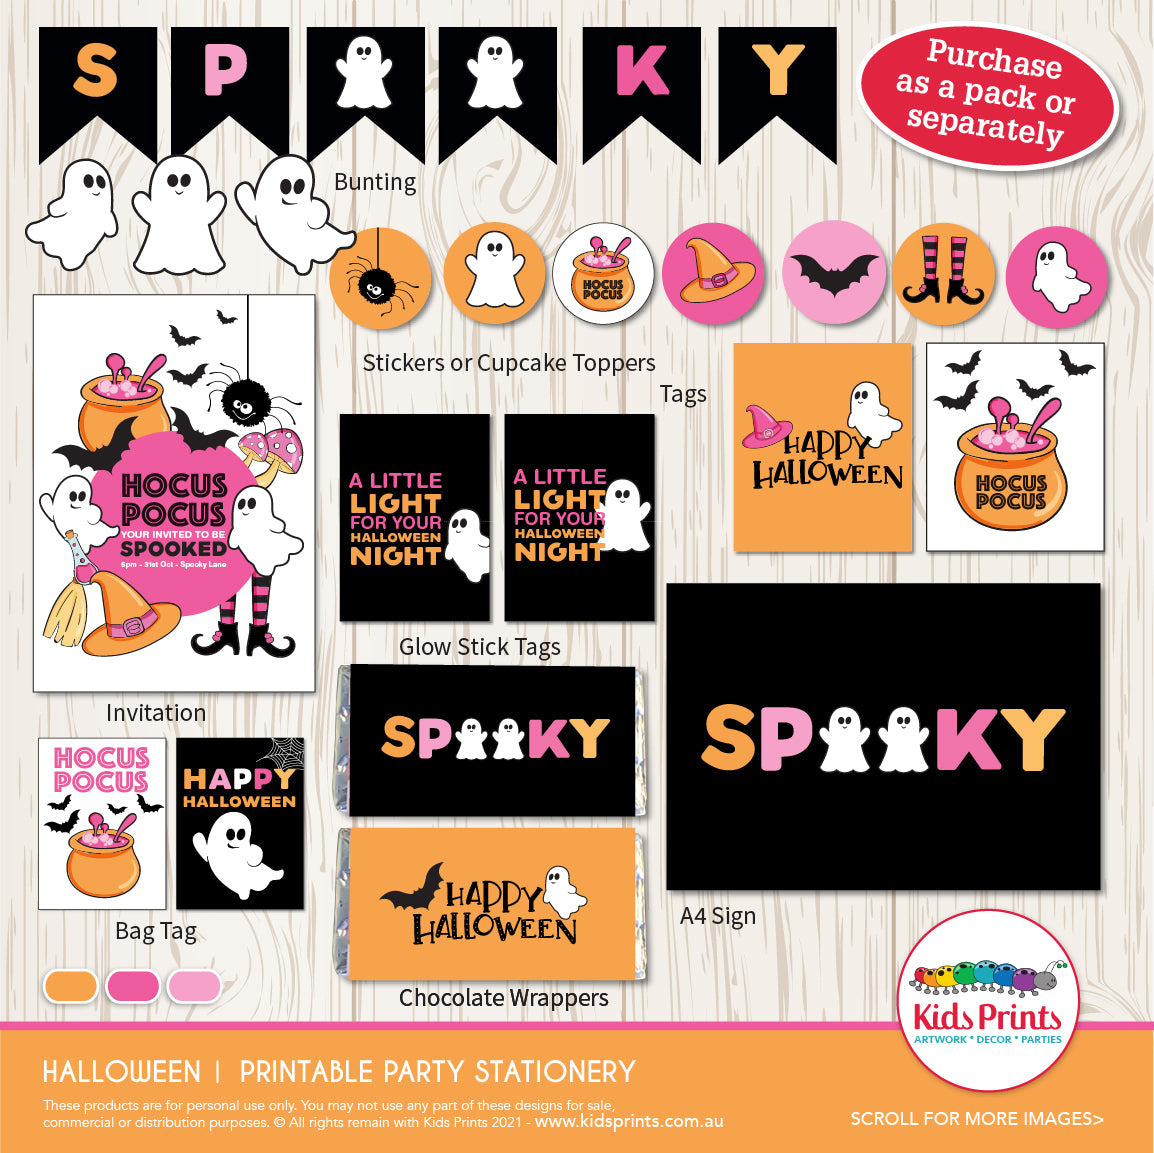 Halloween Party | Printable Stationery - Kids Prints